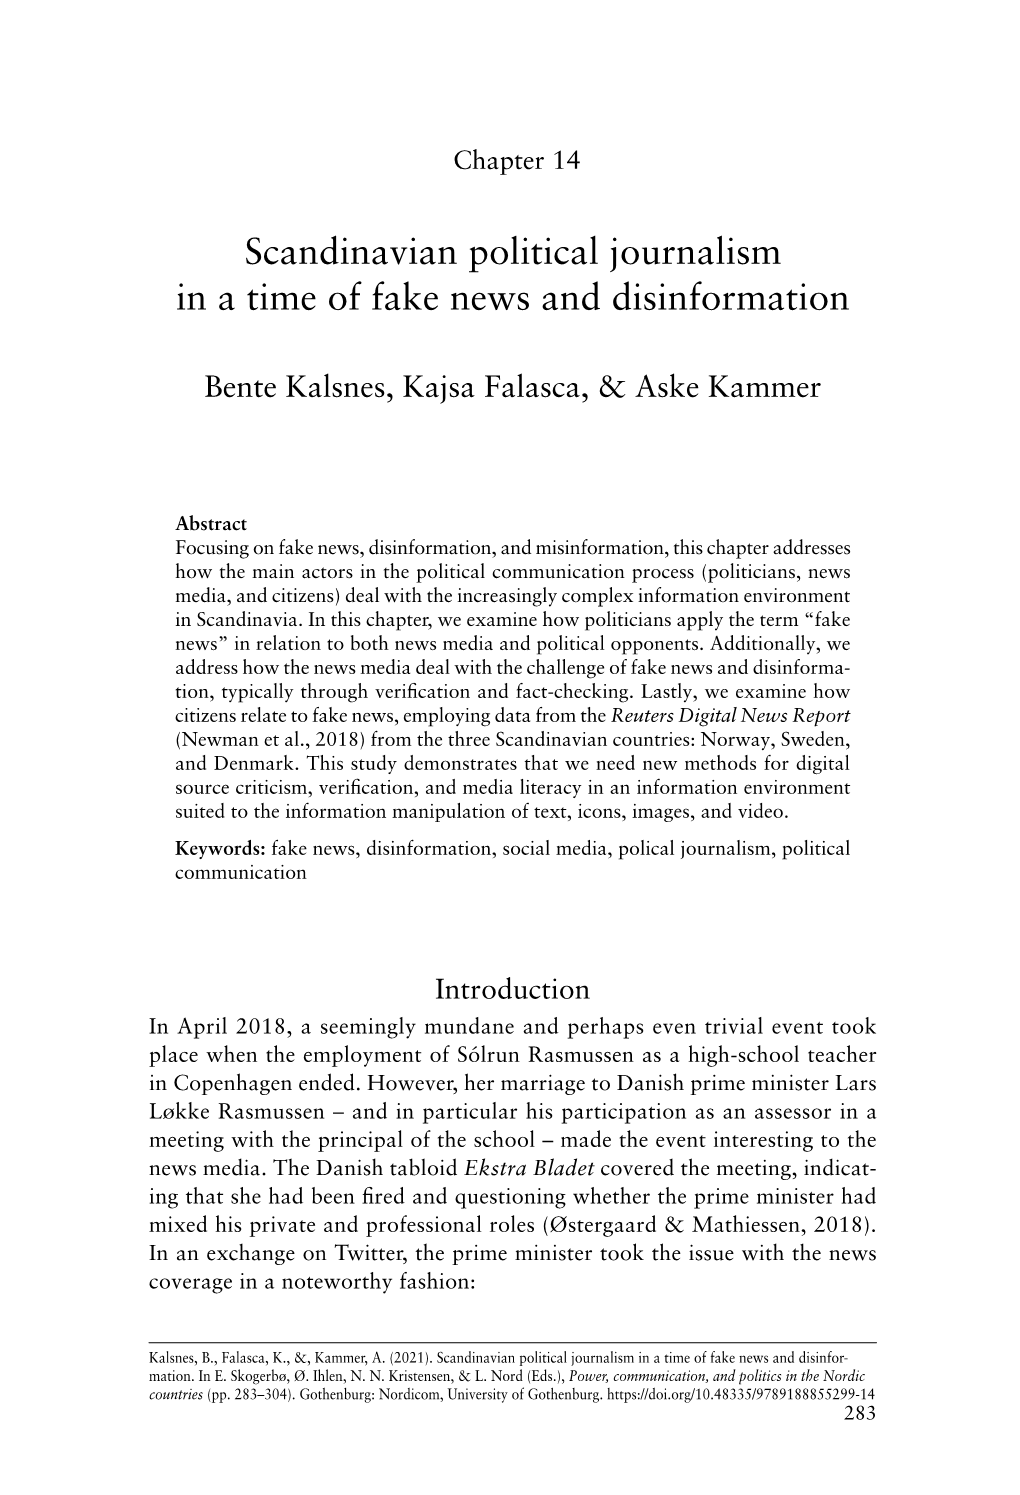 Scandinavian Political Journalism in a Time of Fake News and Disinformation